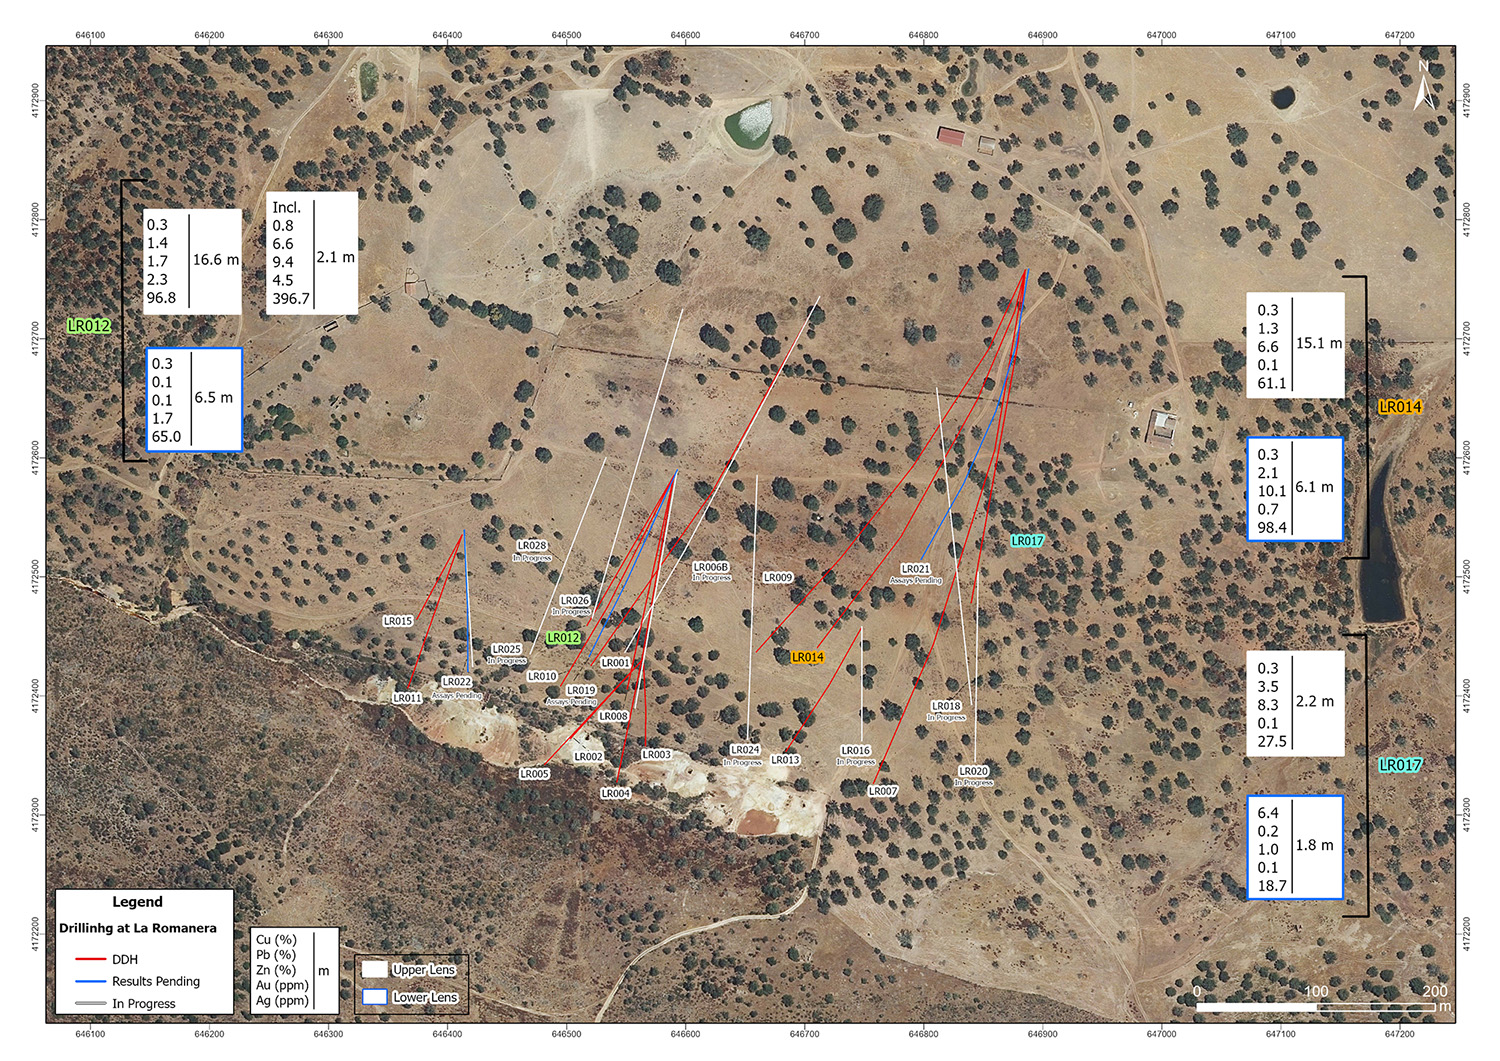 Location map, La Romanera Deposit drill holes LR012, LR014, and LR017. The white drill hole traces show drill holes that are in progress